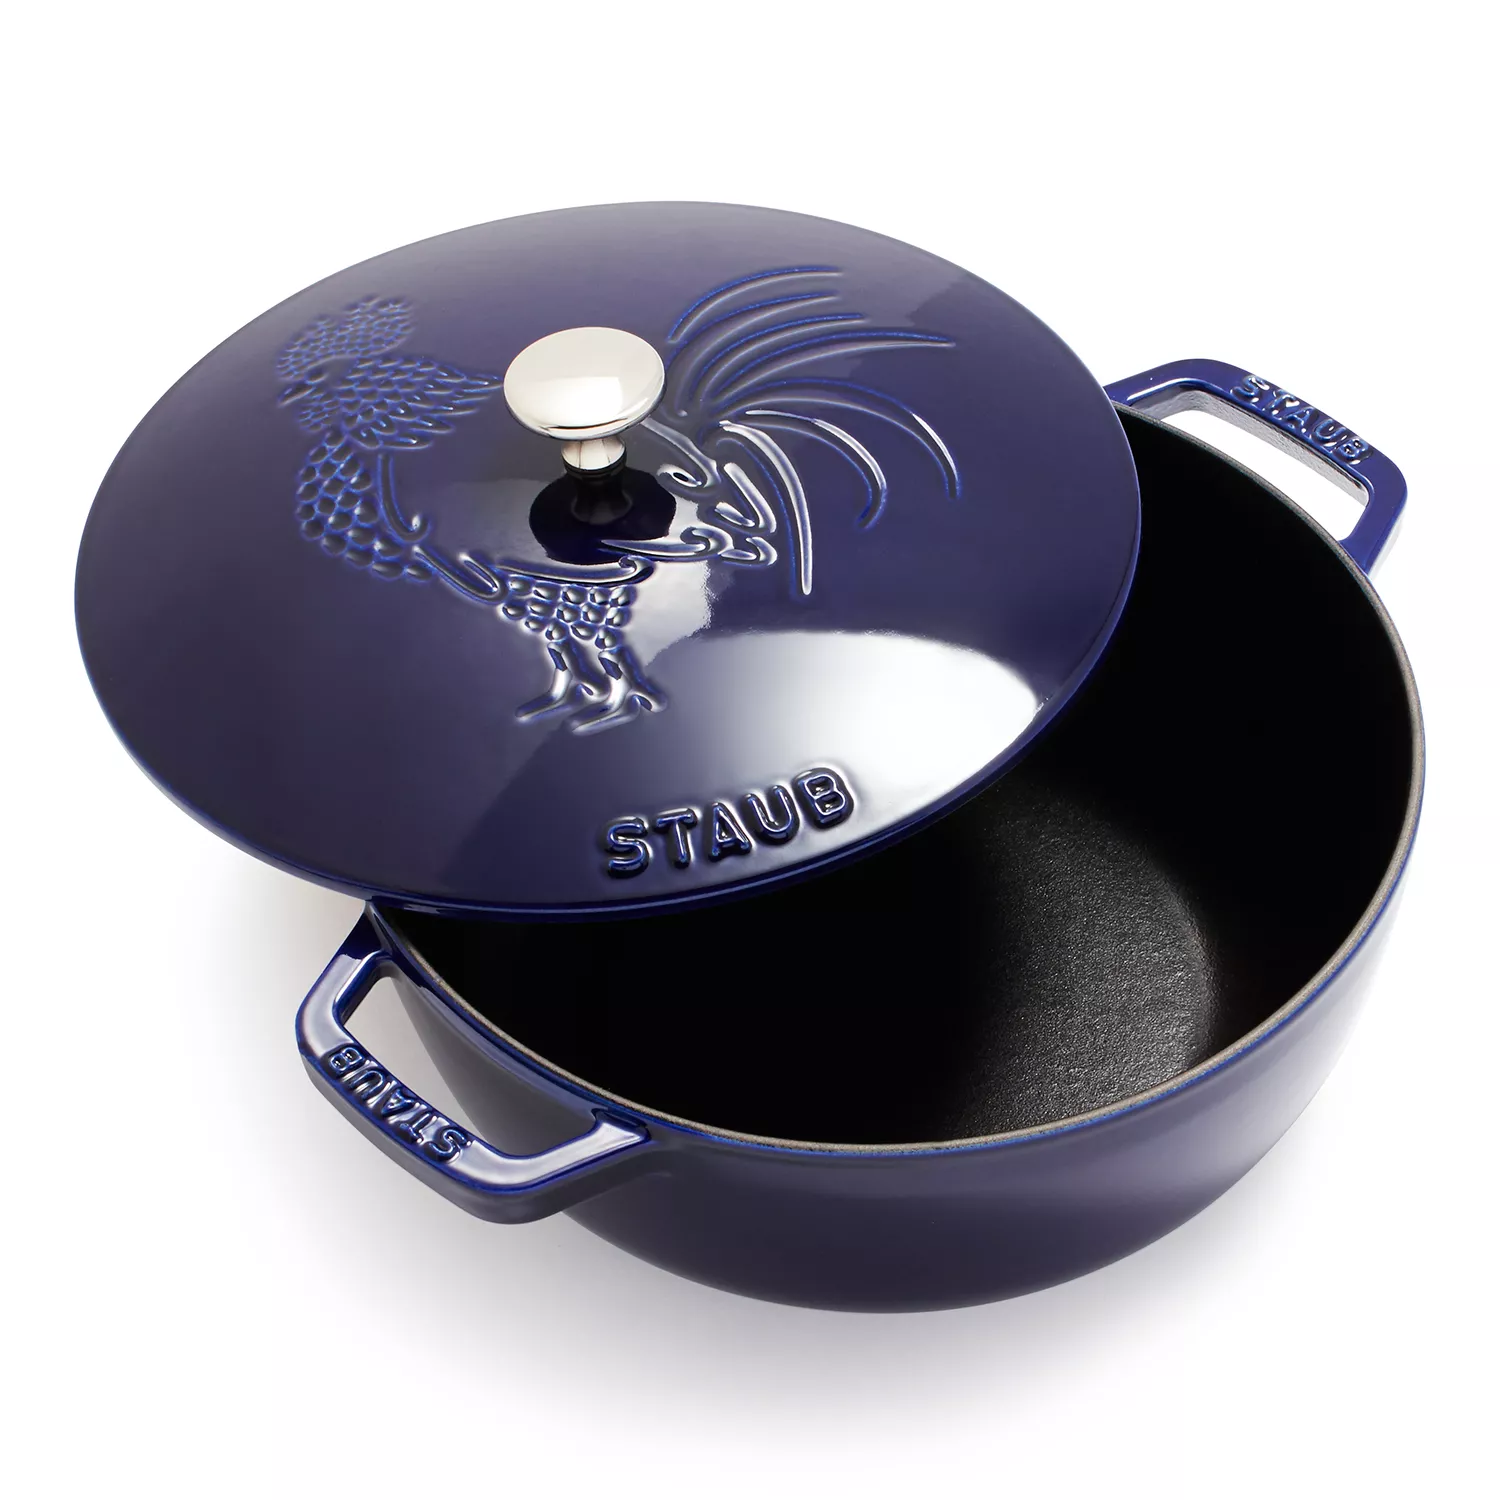 Photos - Terrine / Cauldron Staub Essential French Oven with Rooster Lid 11752491 